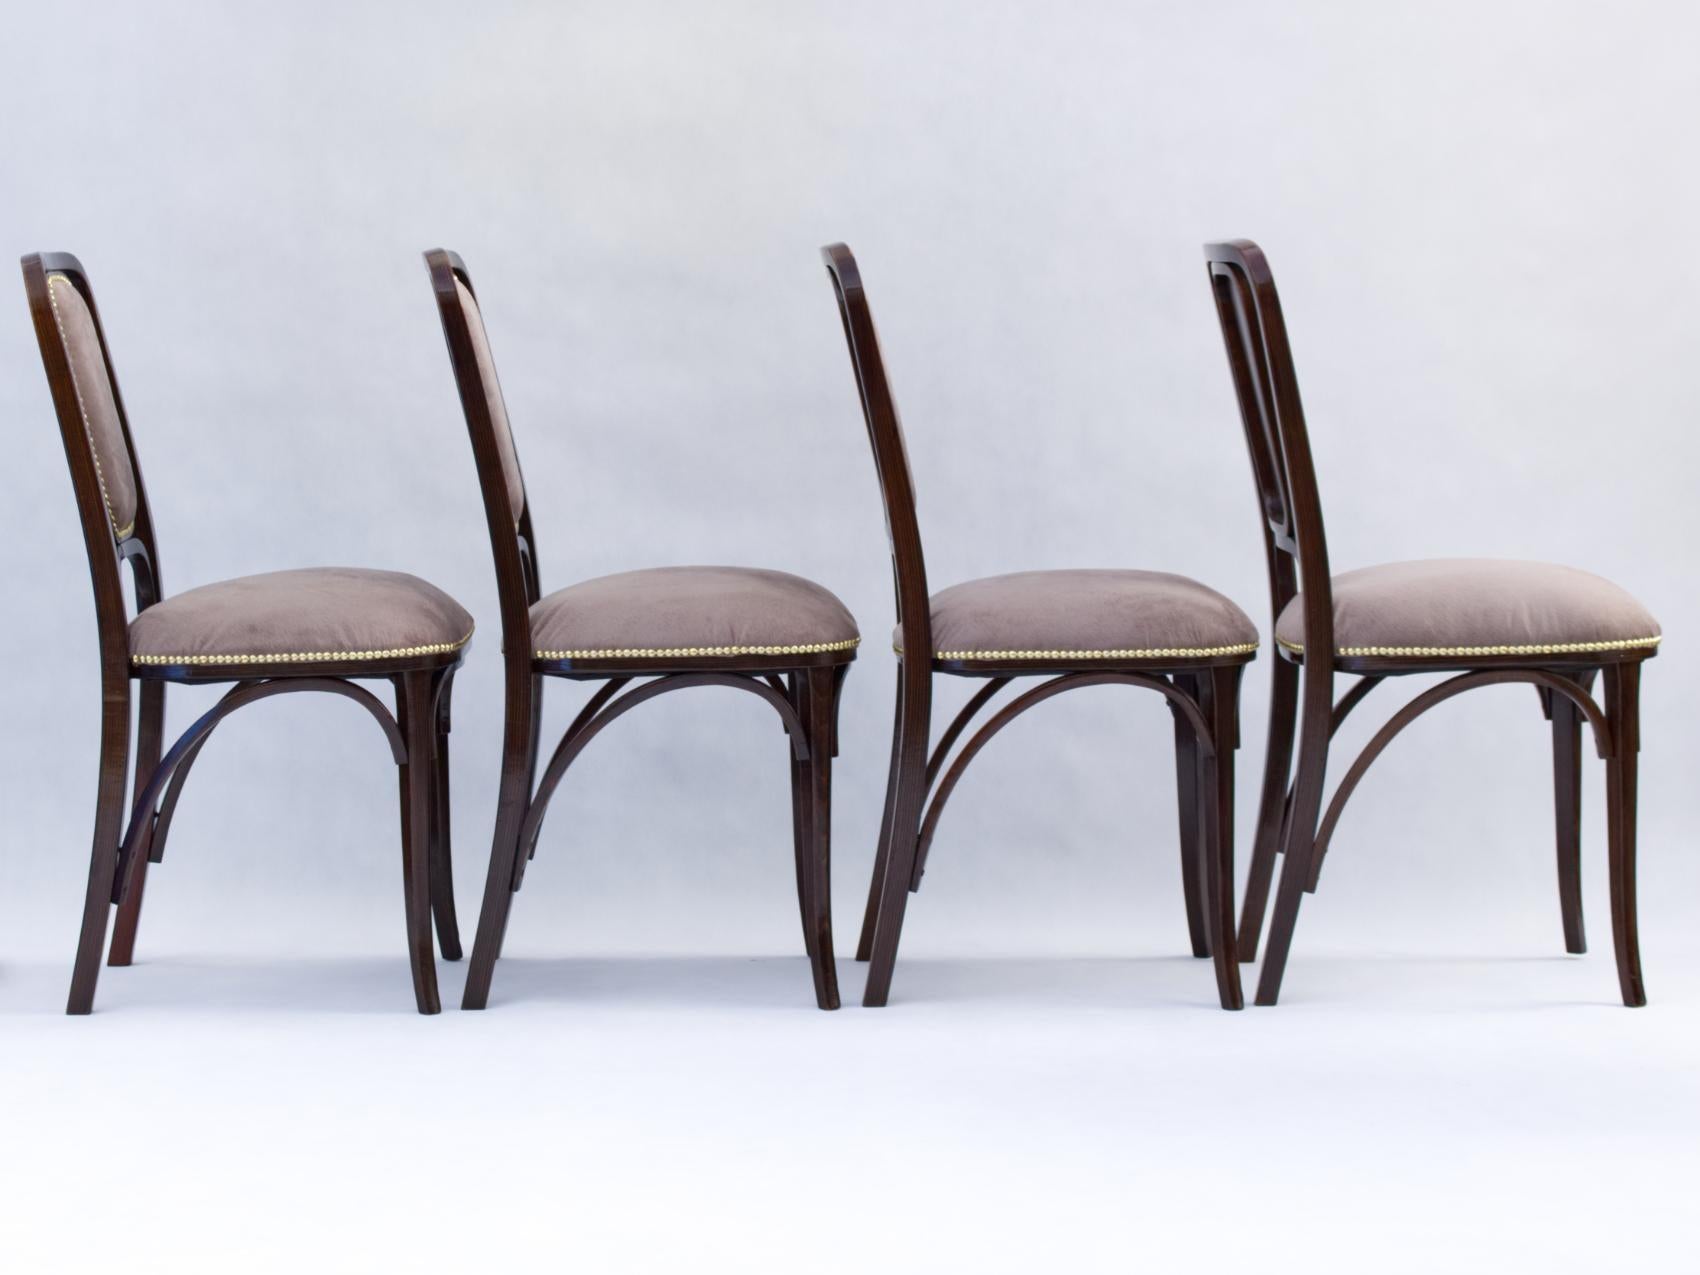 Art Noveau Bentwood Chairs, Early 20th Century, Circa 1905 For Sale 4